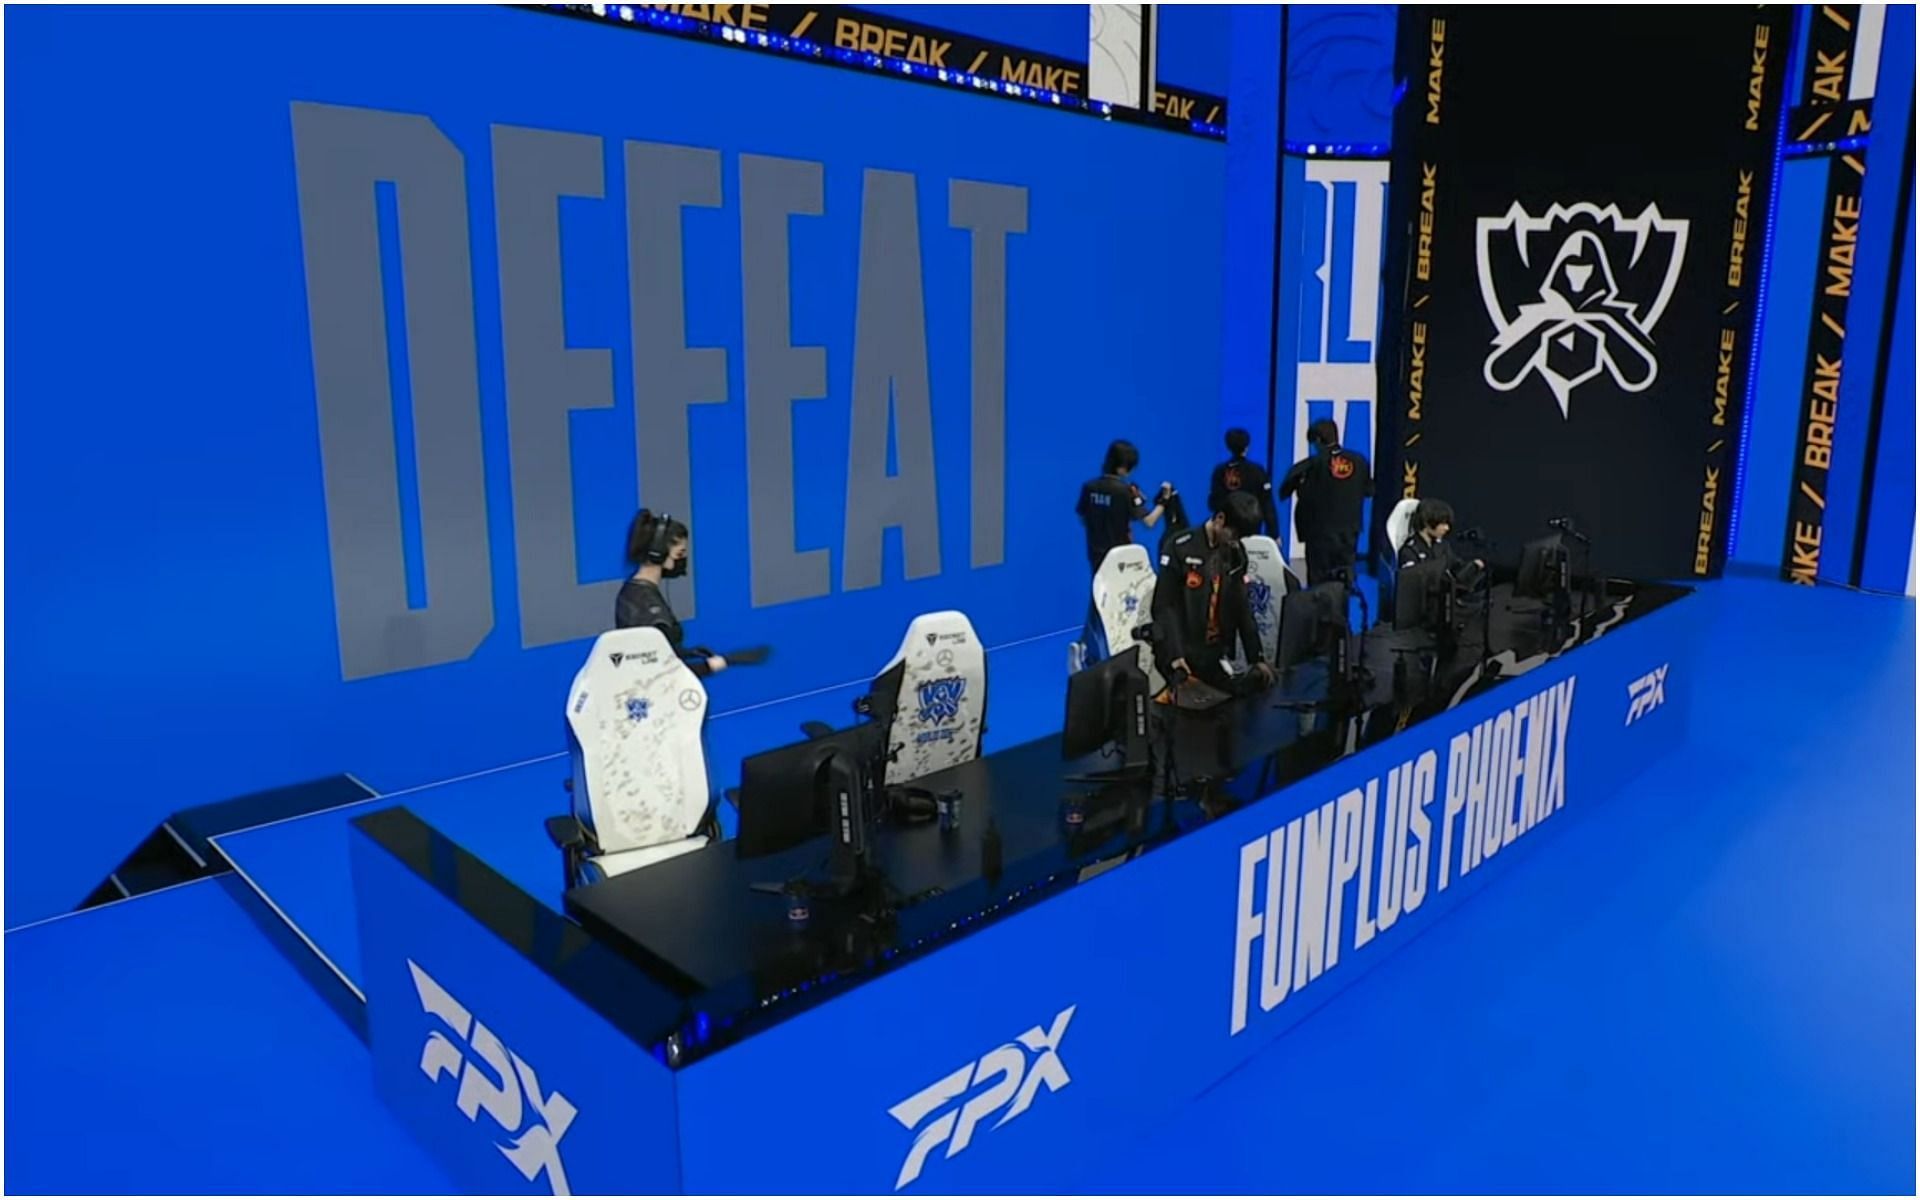 FPX gets knocked out from League of Legends Worlds 2021 as they lost to both Rogue and Cloud9 (Image via League of Legends)